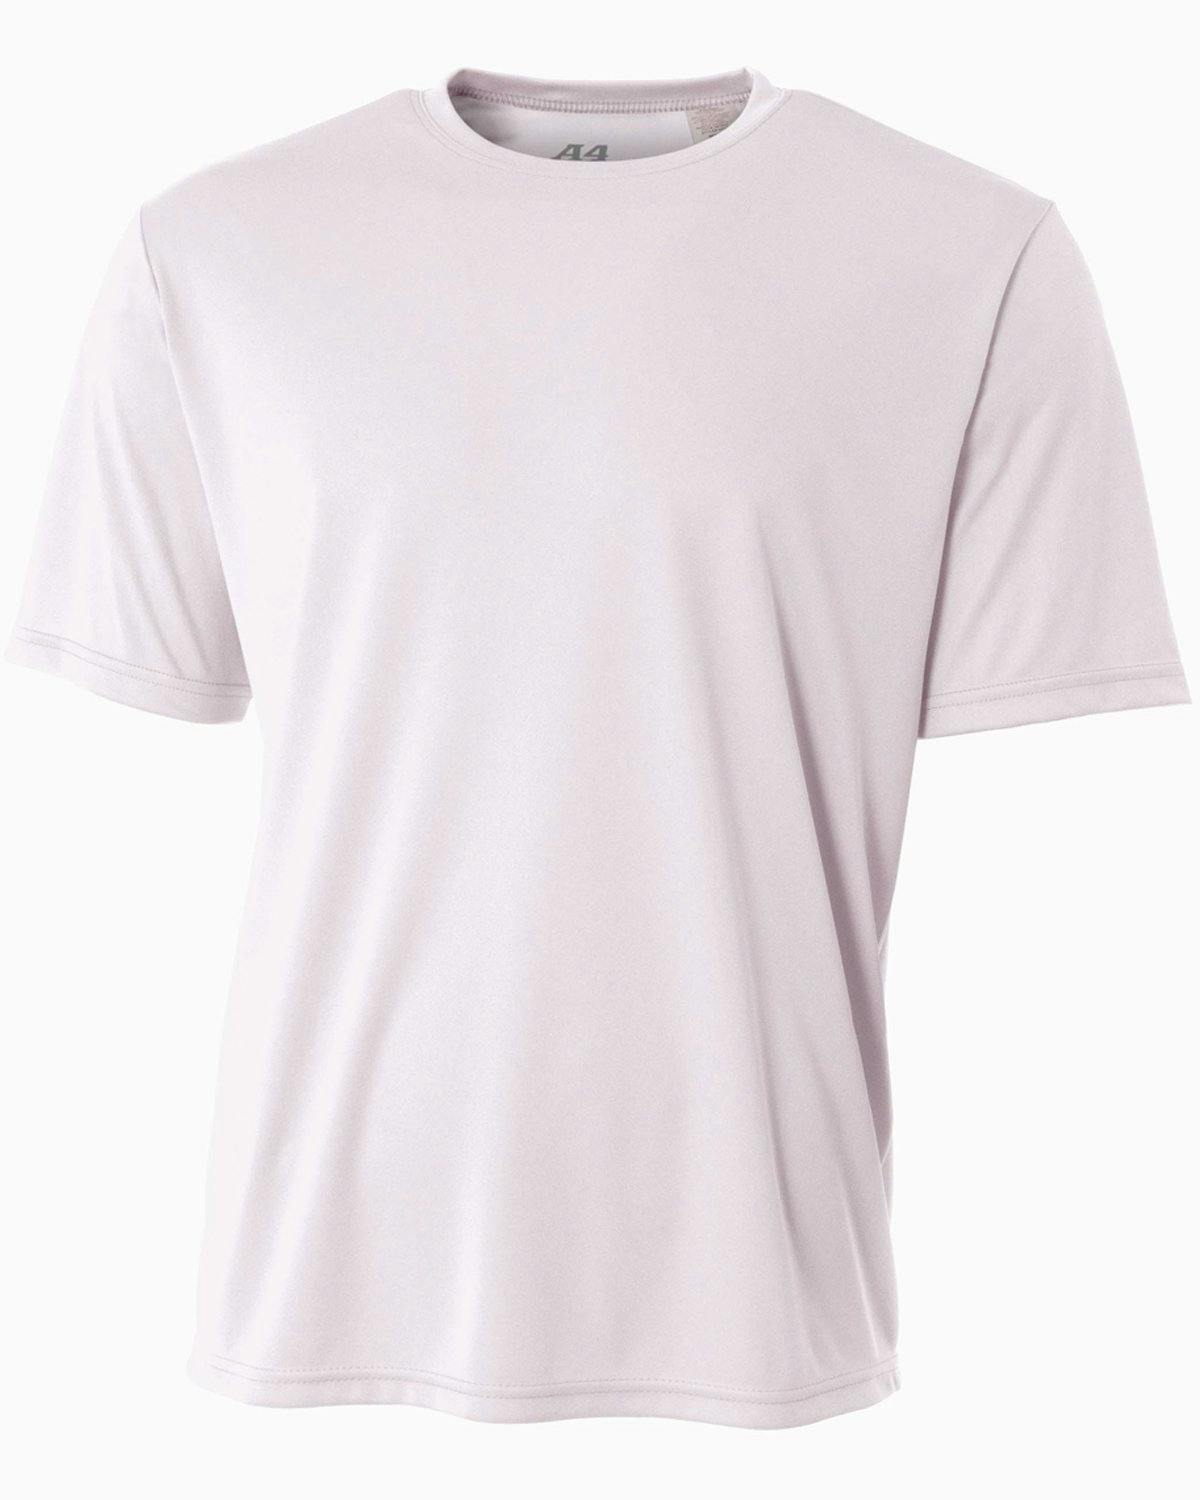 Image for Men's Cooling Performance T-Shirt